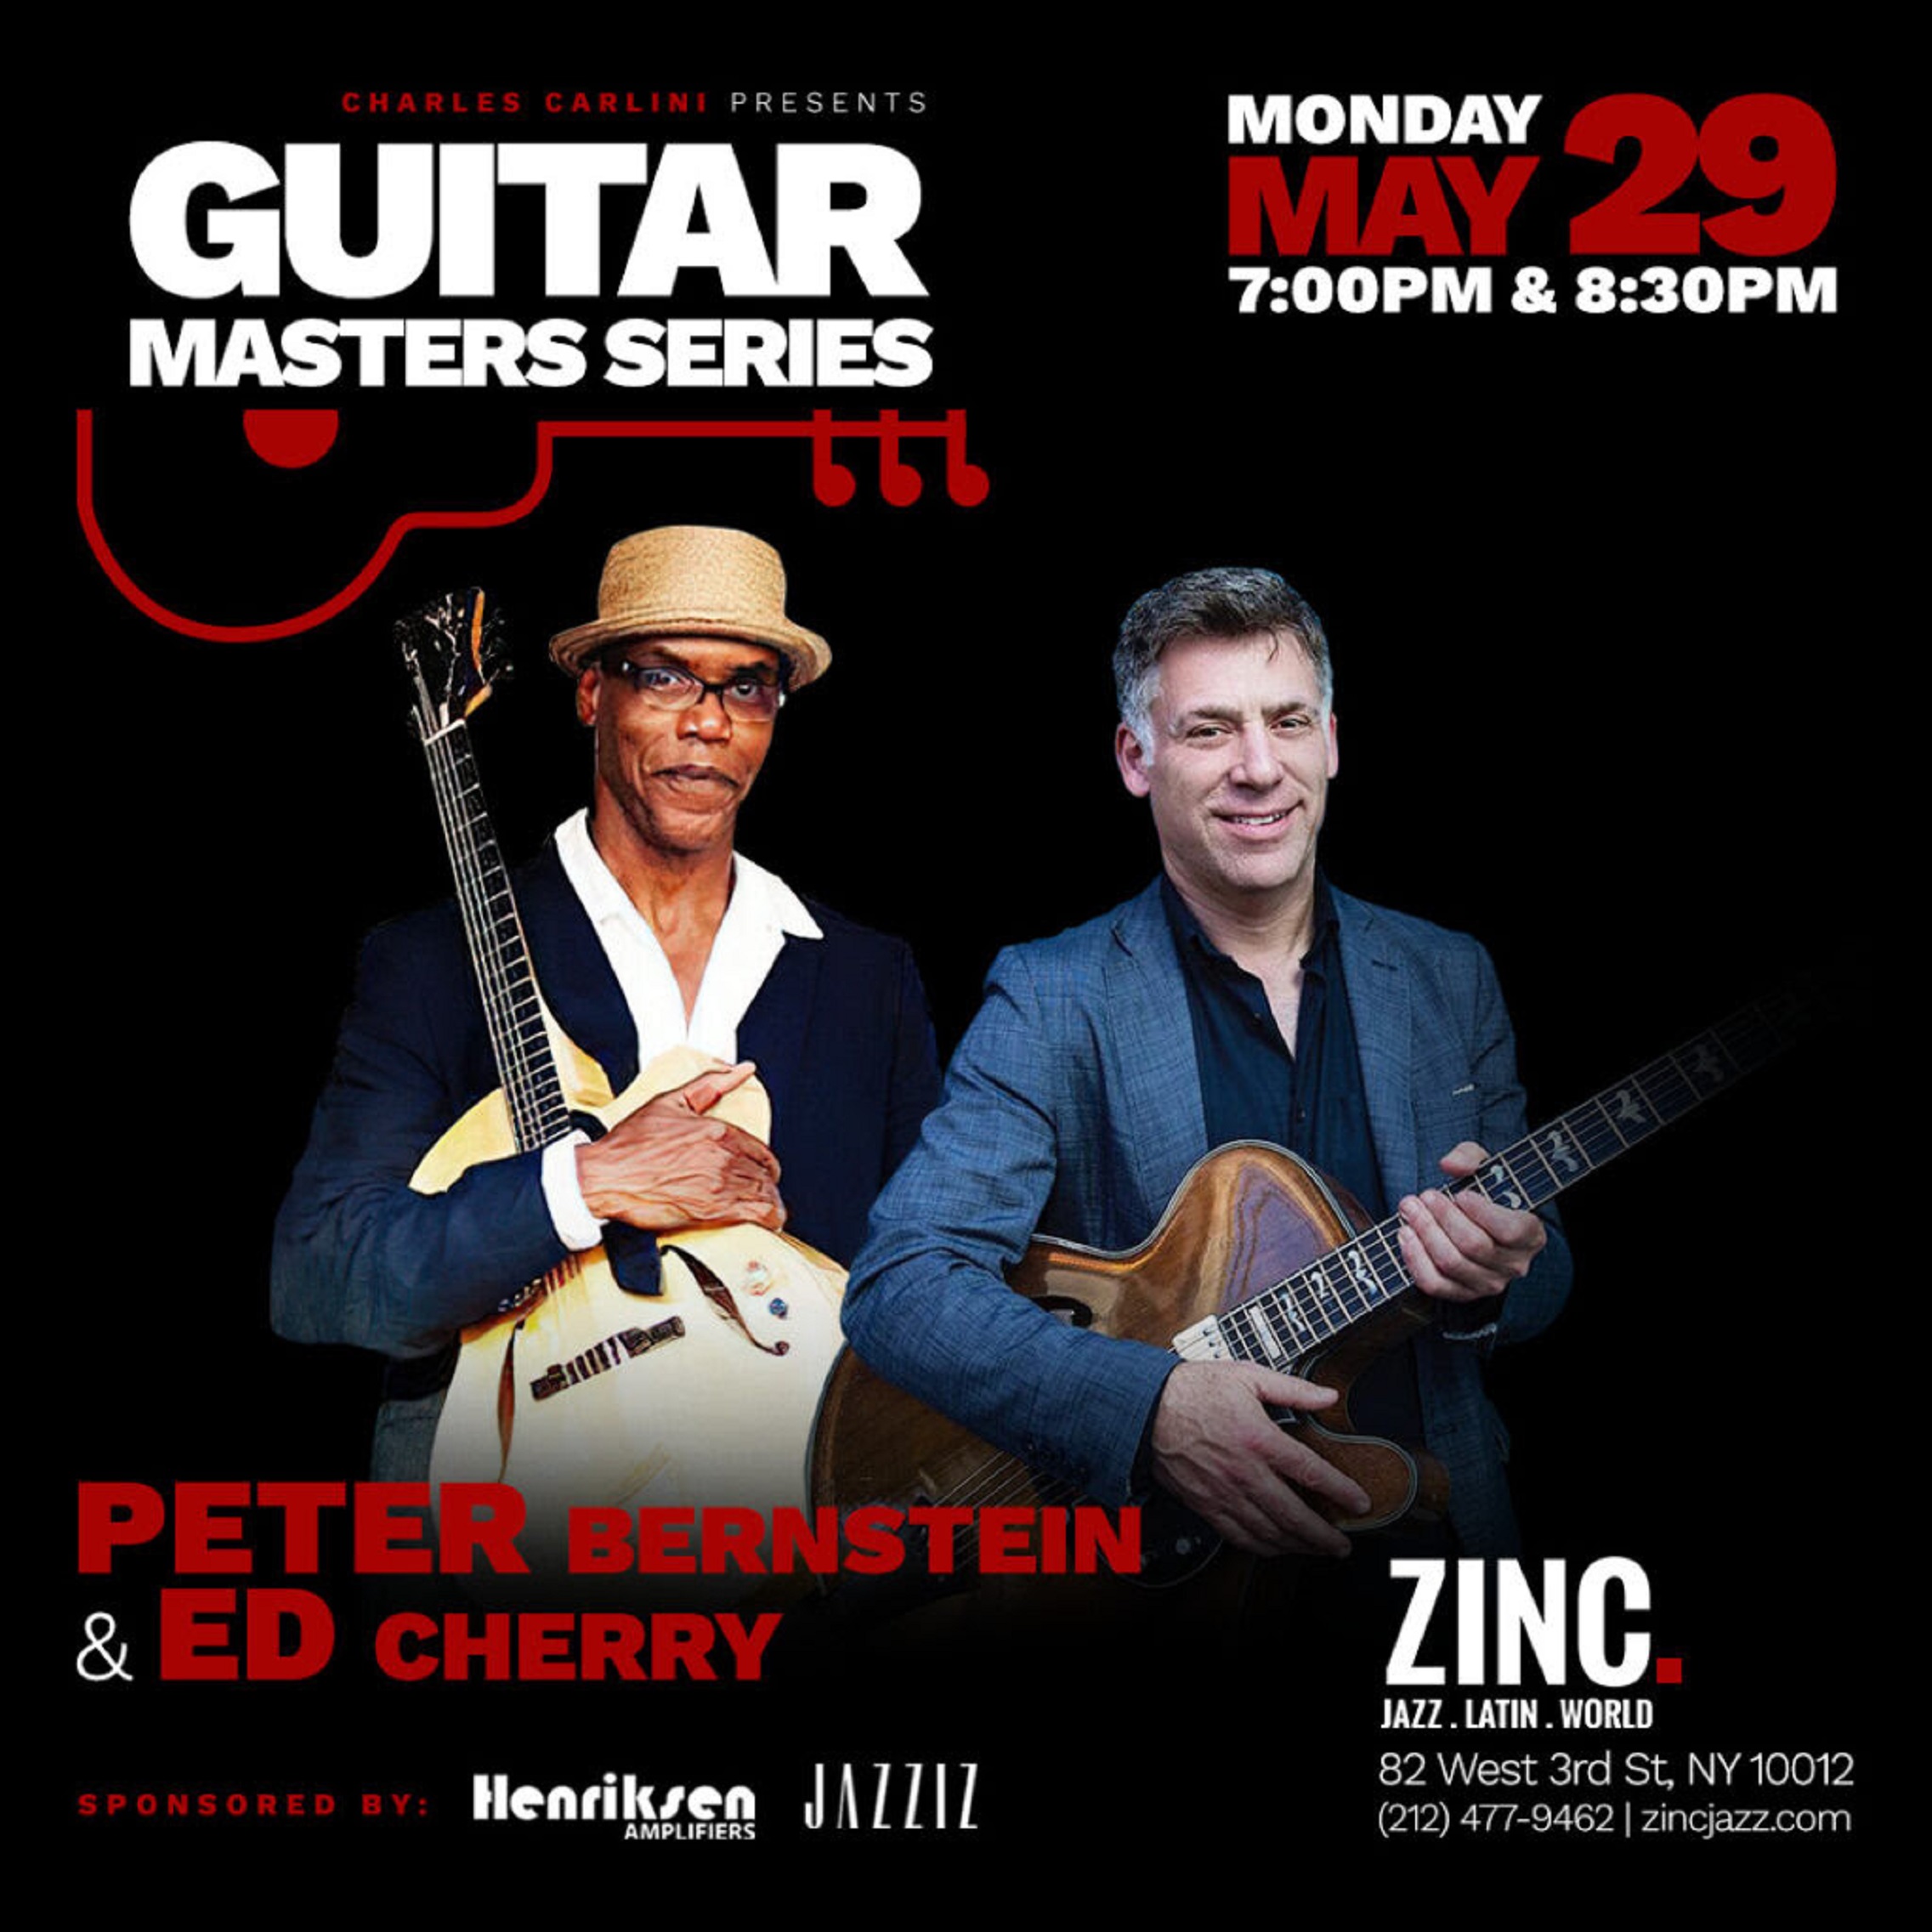 Acclaimed jazz guitarists Peter Bernstein & Ed Cherry bring their formidable quartet to Zinc on Monday, May 29